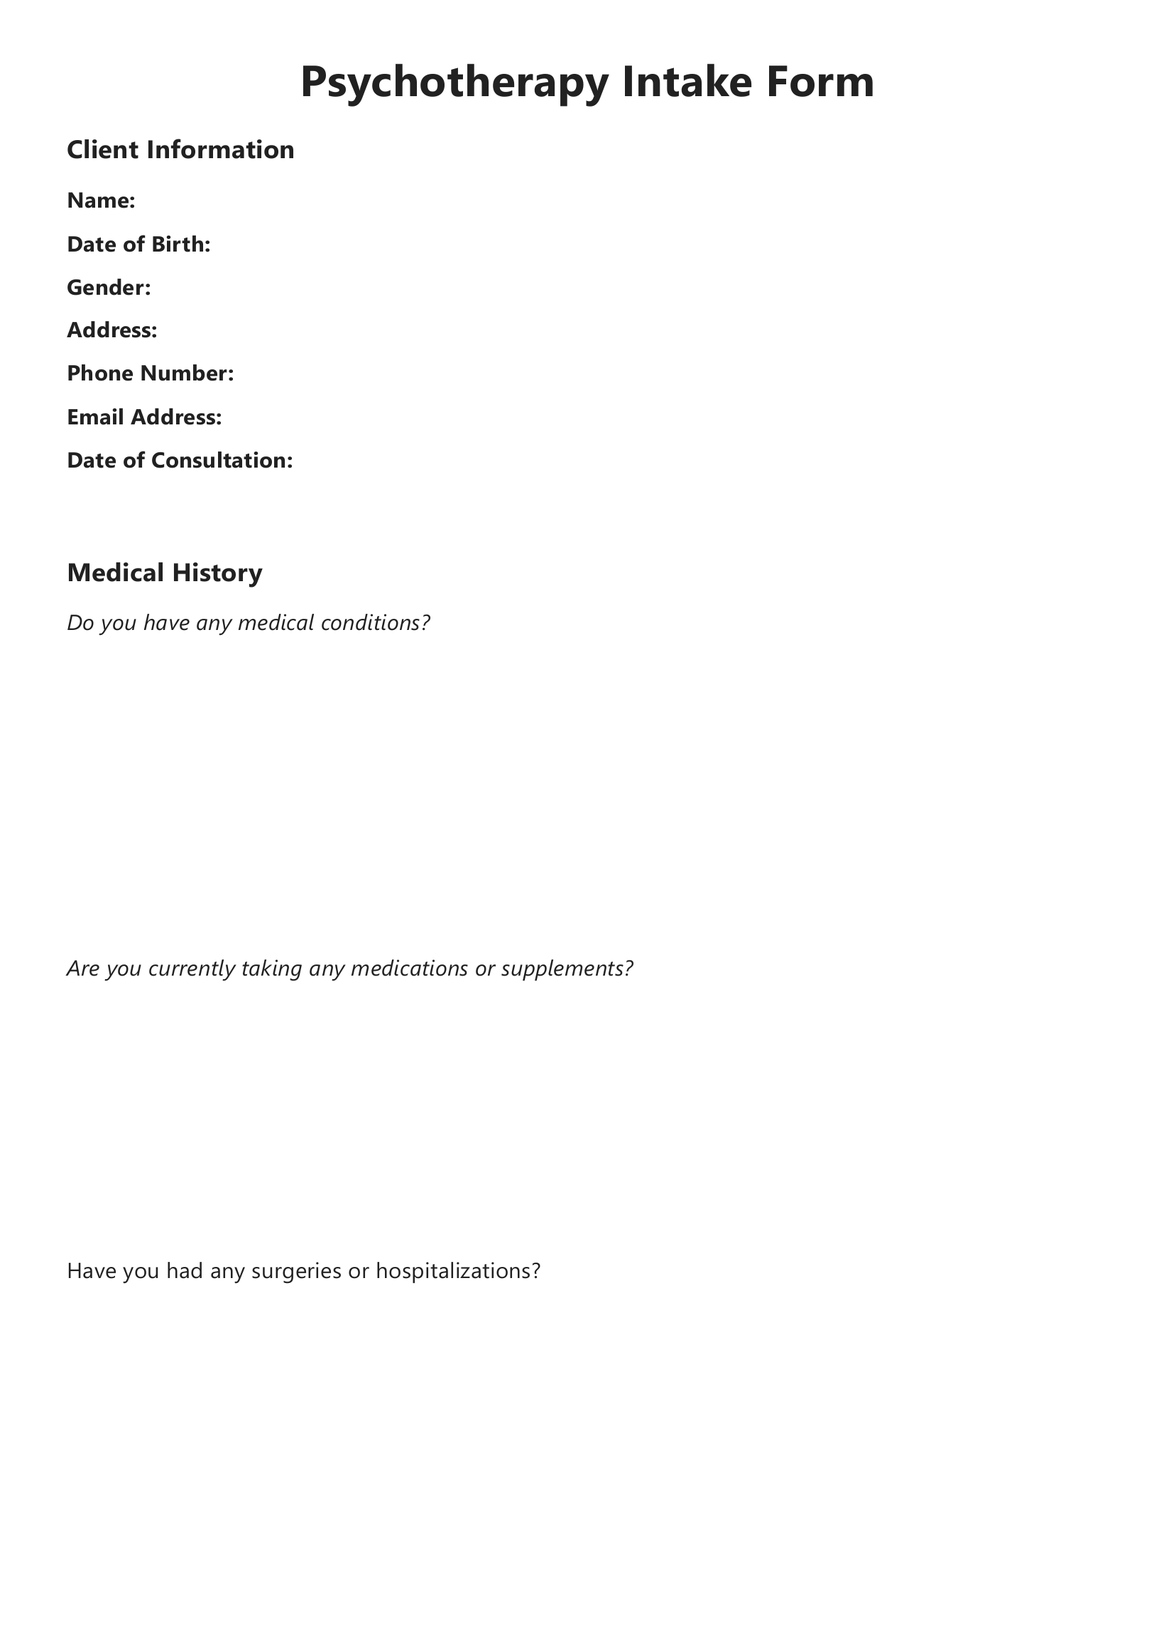 Psychotherapy Intake Form PDF Example